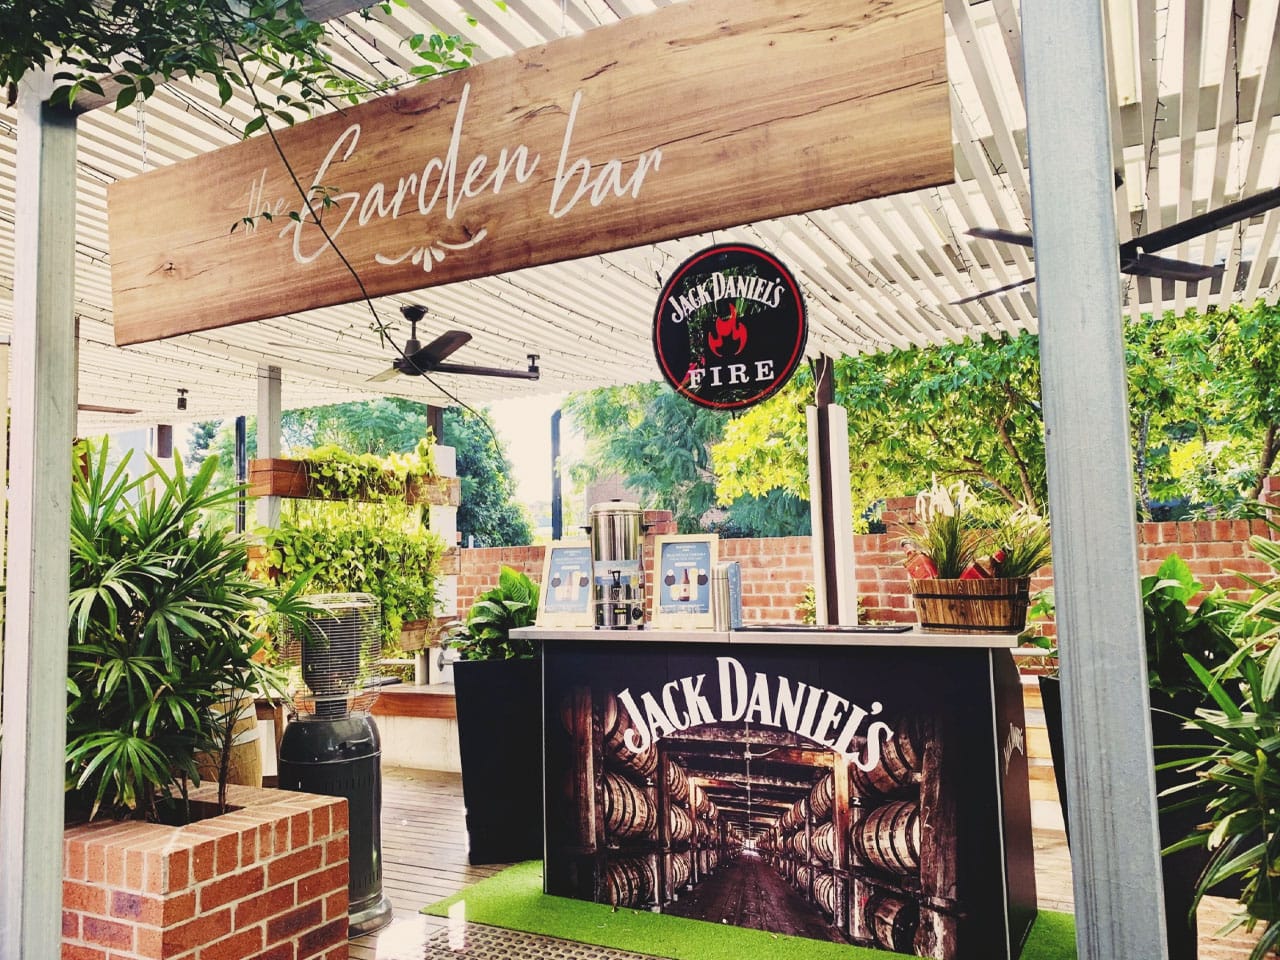 Beer garden entrance with Jack Daniels stand